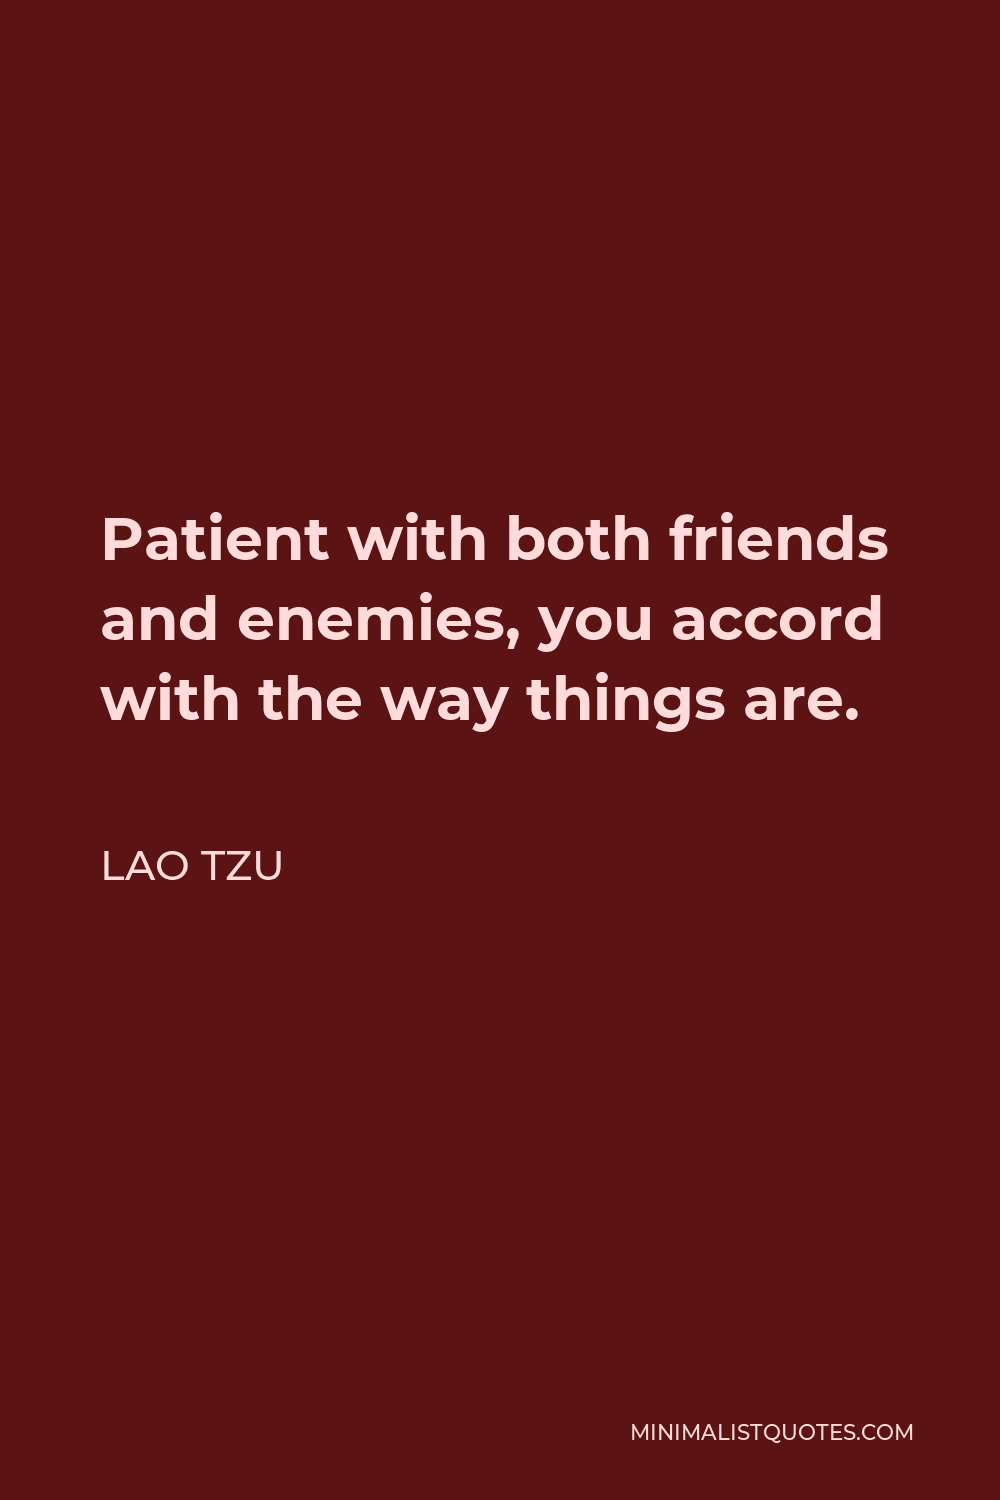 Lao Tzu Quote - Patient with both friends and enemies, you accord with the way things are.